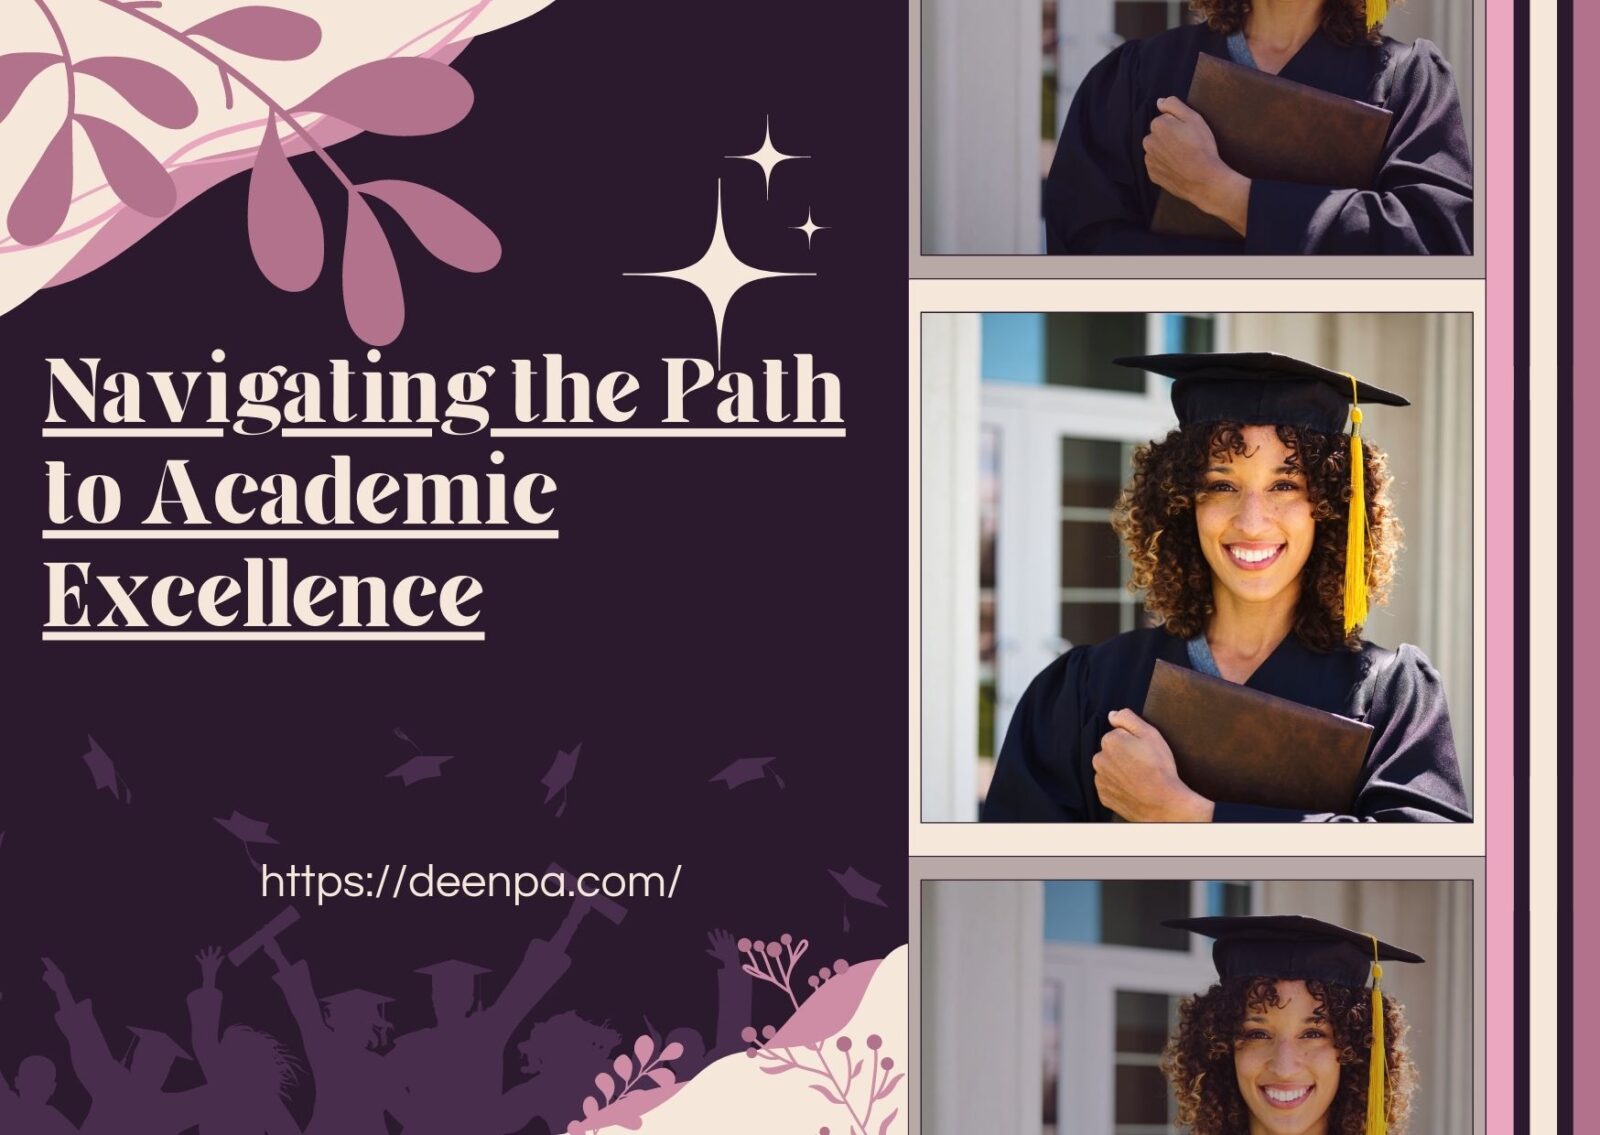 Navigating the Path to Academic Excellence